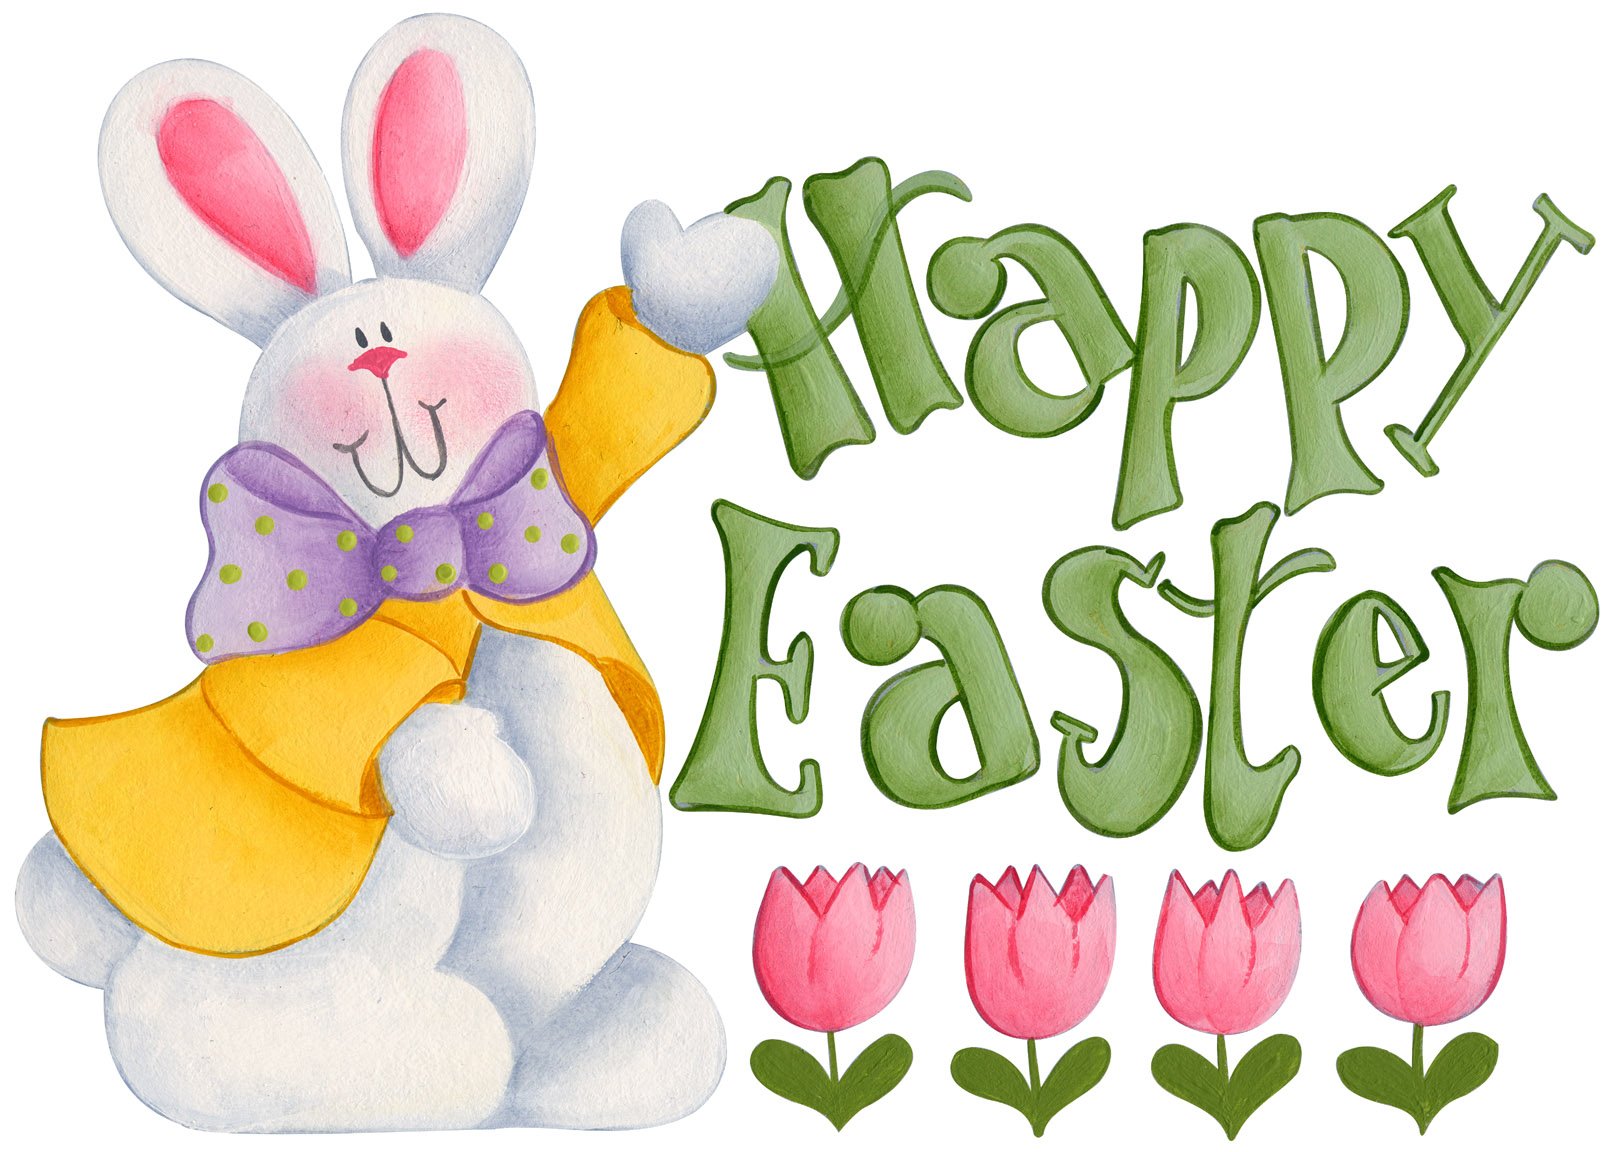 Easter clipart morning. Happy quotes wishes images